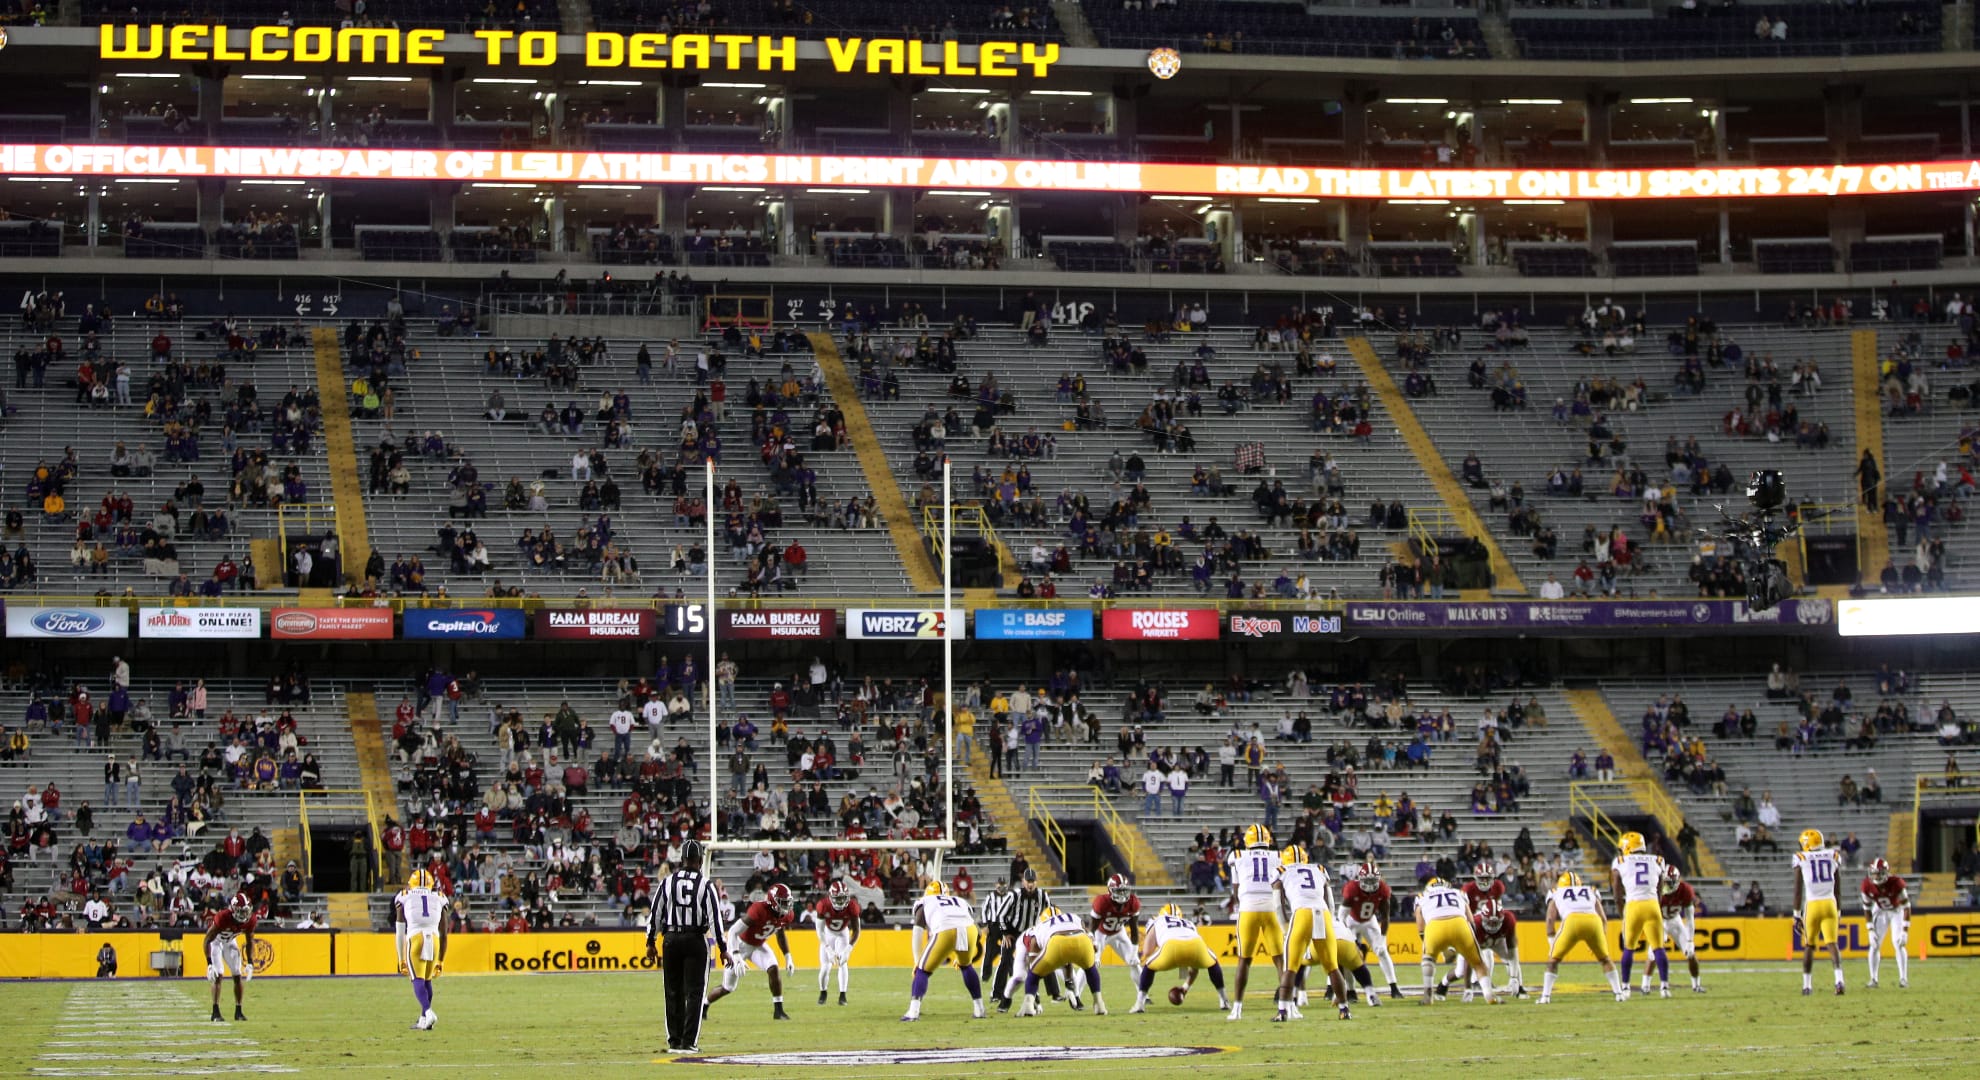 The Alabama Crimson Tide play the LSU Tigers at Tiger Stadium on December 05, 2020 in Baton Rouge, Louisiana. (Photo by Chris Graythen/Getty Images)